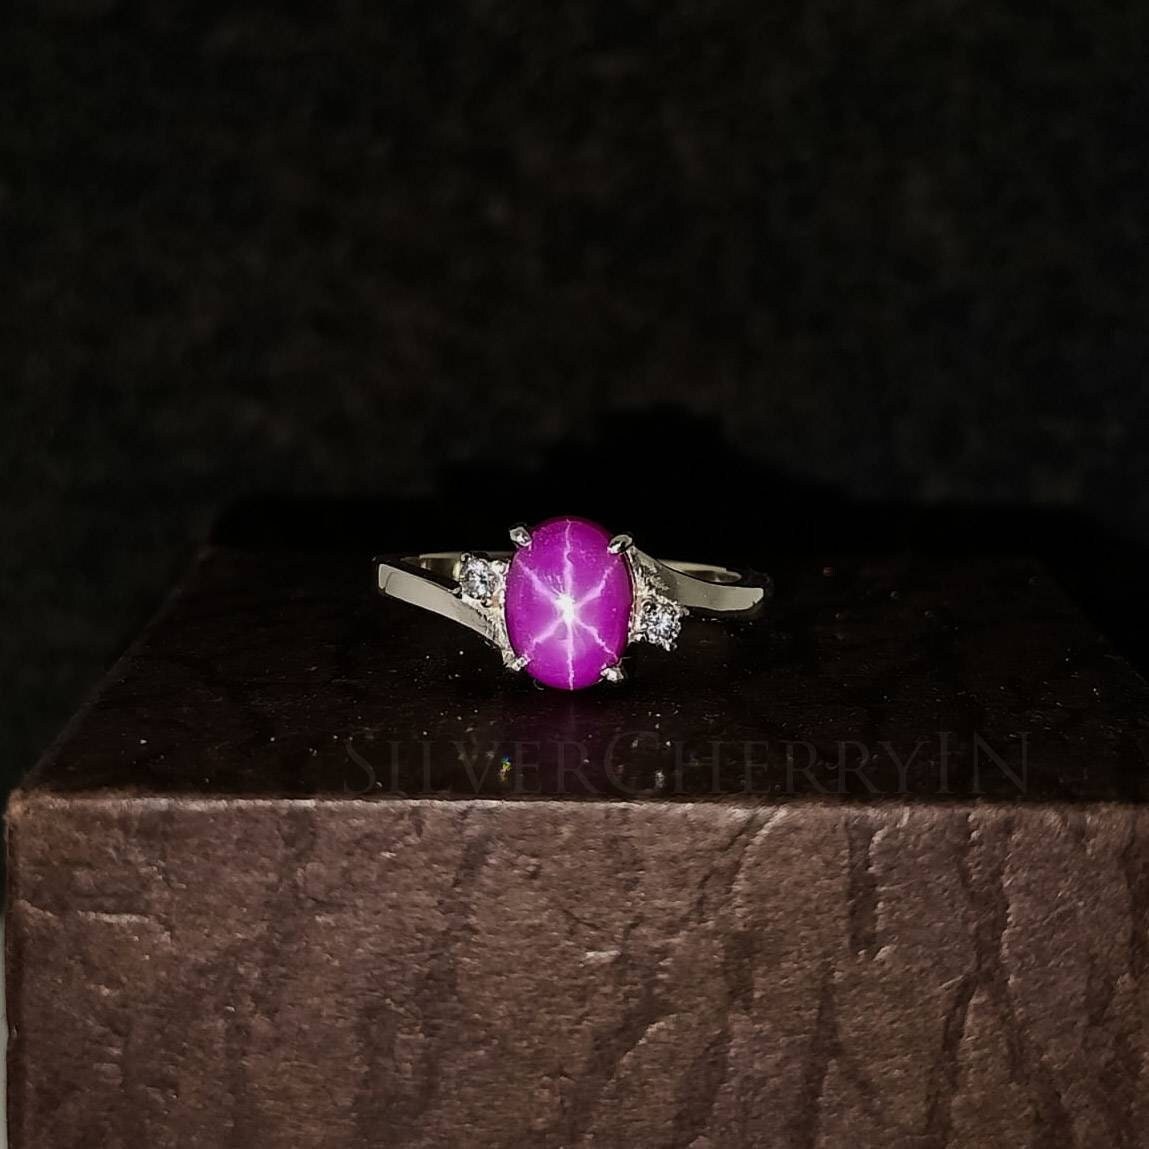 Grippingbeast star sapphire ring A viking ring by George